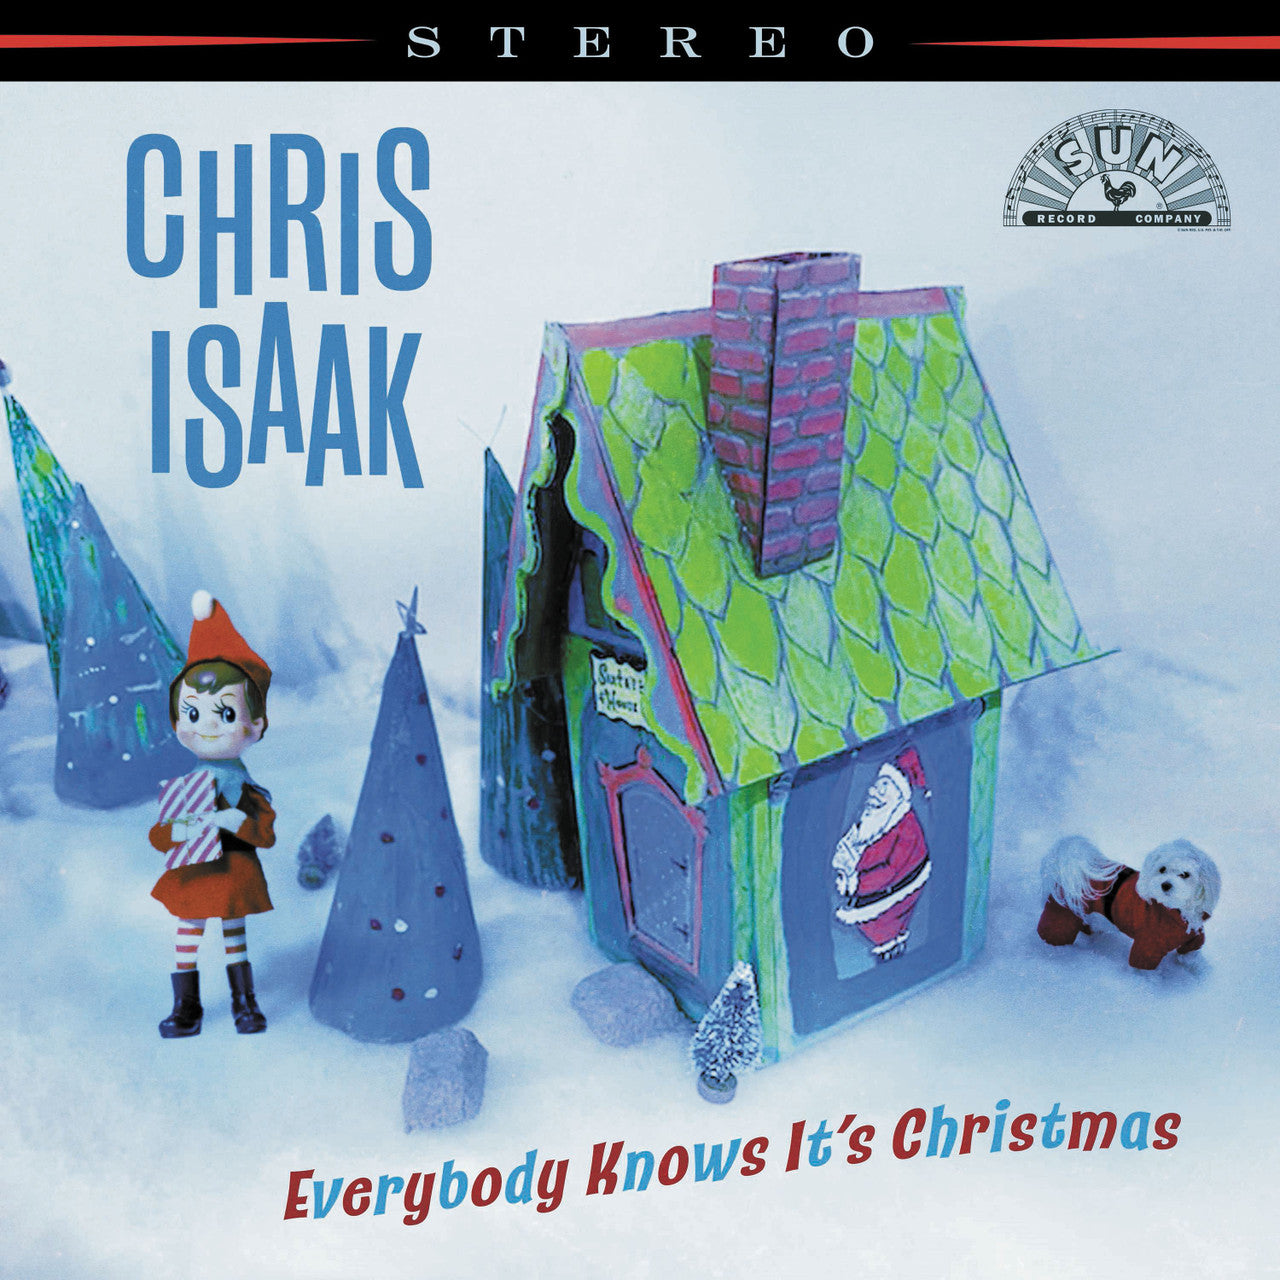 Chris Isaak | Everybody Knows It's Christmas [Candy Floss LP] | Vinyl